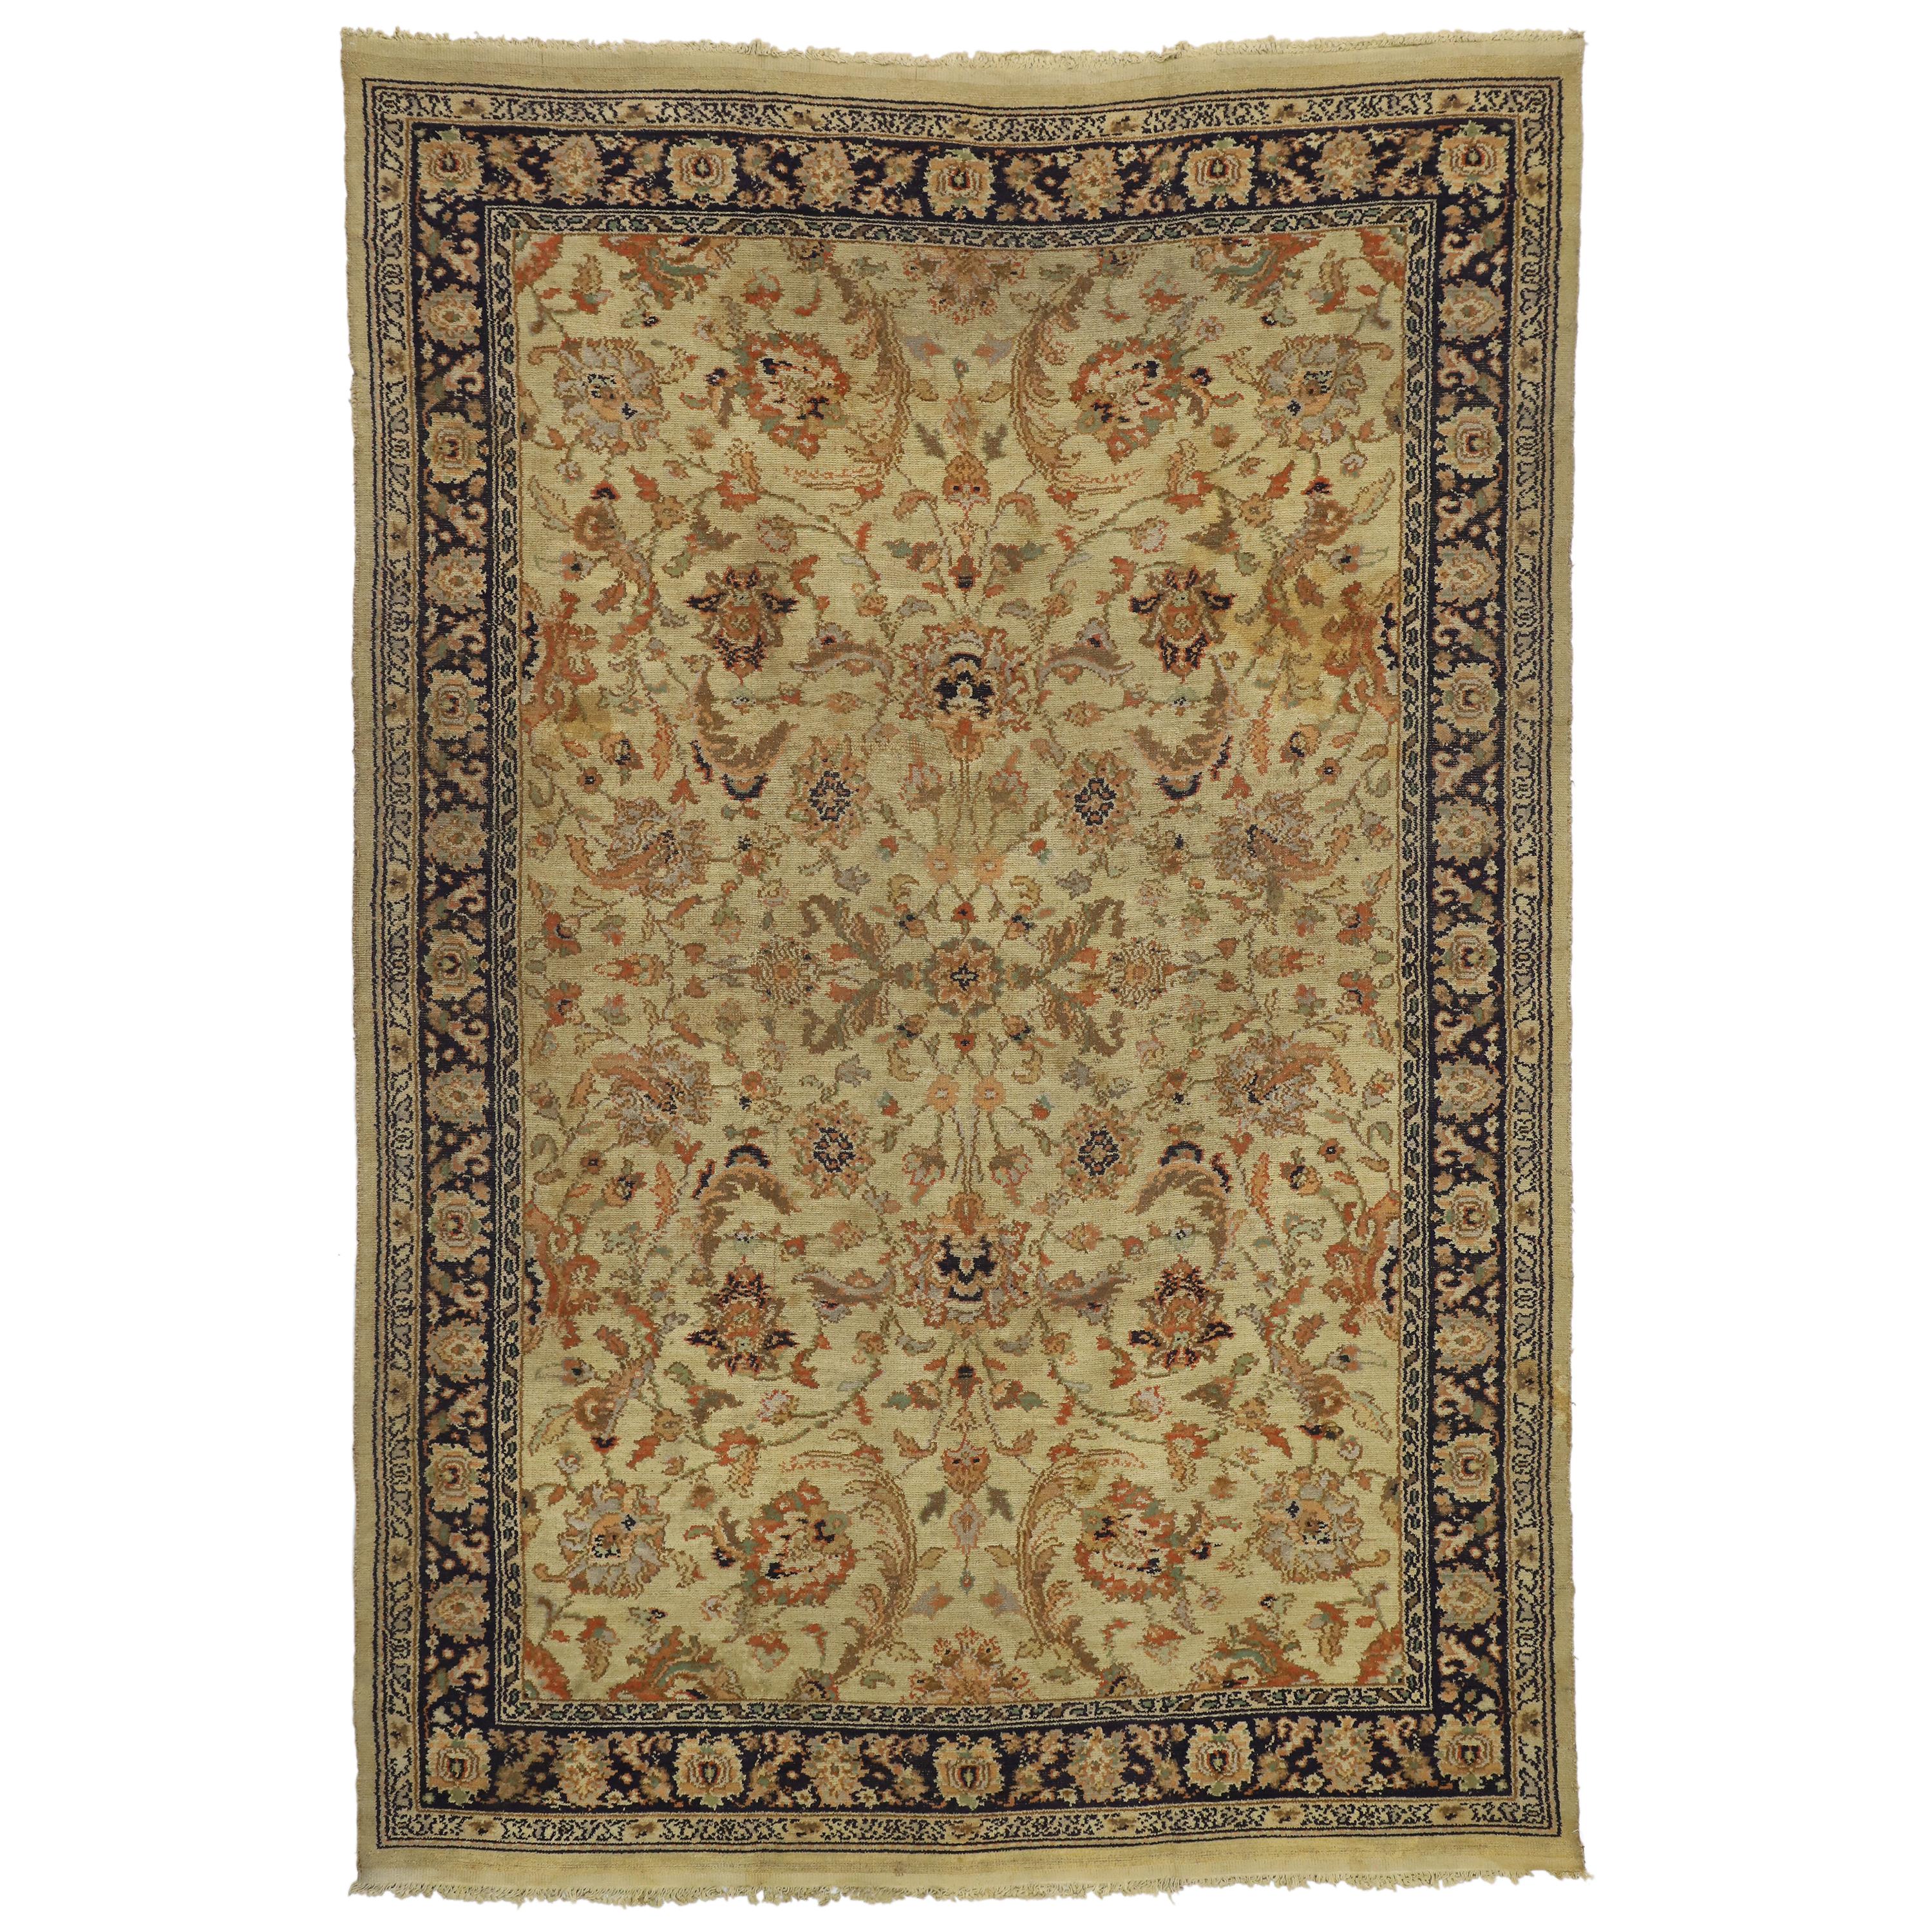 Distressed Antique European Spanish Area Rug with Arts & Crafts Style